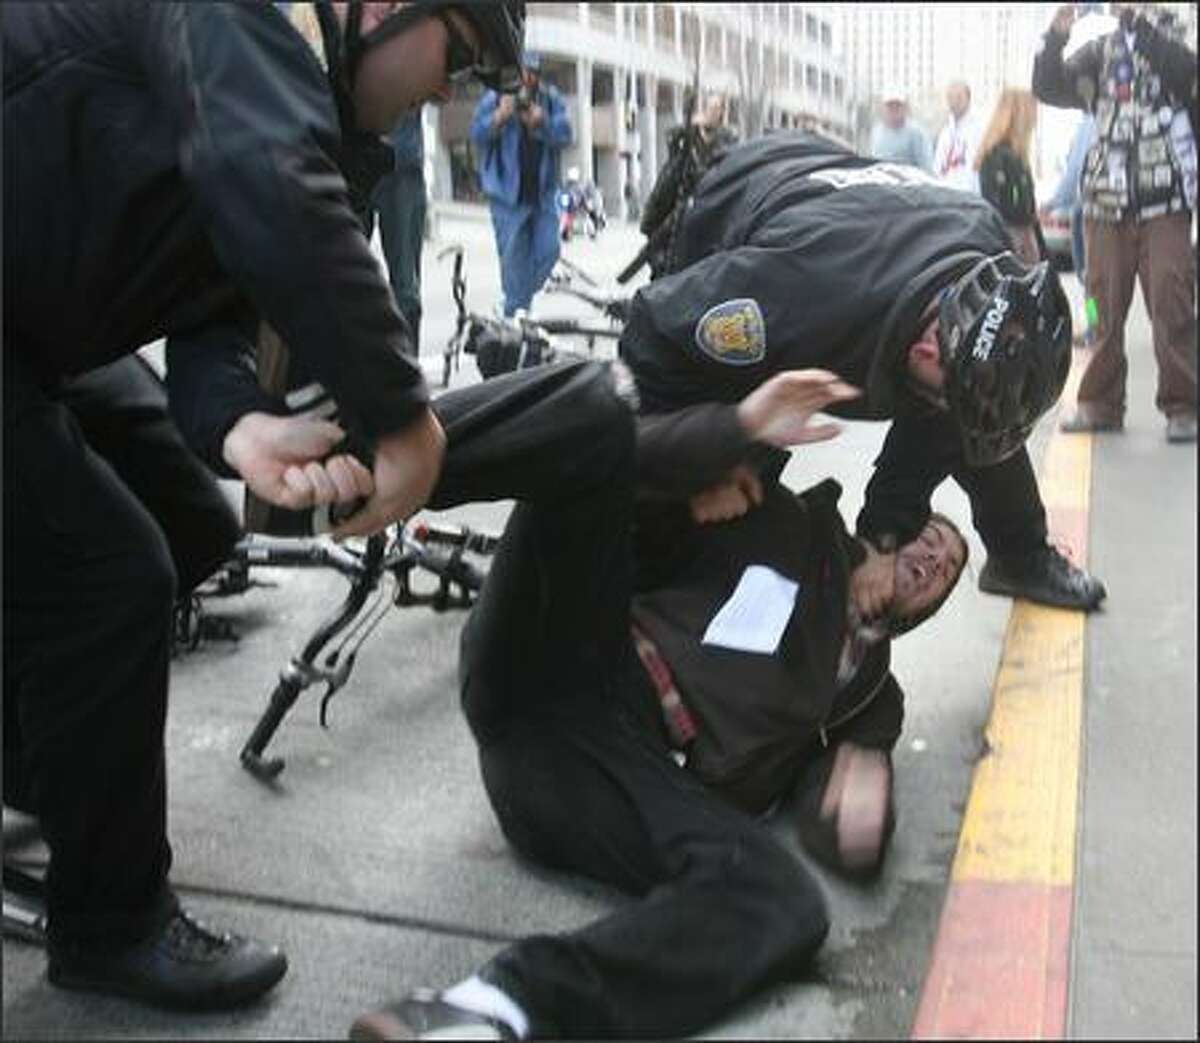 Seattle Police officers wrestle an anti-war protester to the ground. The momentary scuffle ended with the arrest of a 22-year-old Tacoma activist. The man was arrested for allegedly assaulting two counter-protesters, Seattle Police spokesman Sean Whitcomb said. No one was hurt. The man was participating in an anti-war protest to mark the fourth anniversary of the Iraq war. The protest starting at Westlake Center and progressed through the downtown area on Sunday in Seattle